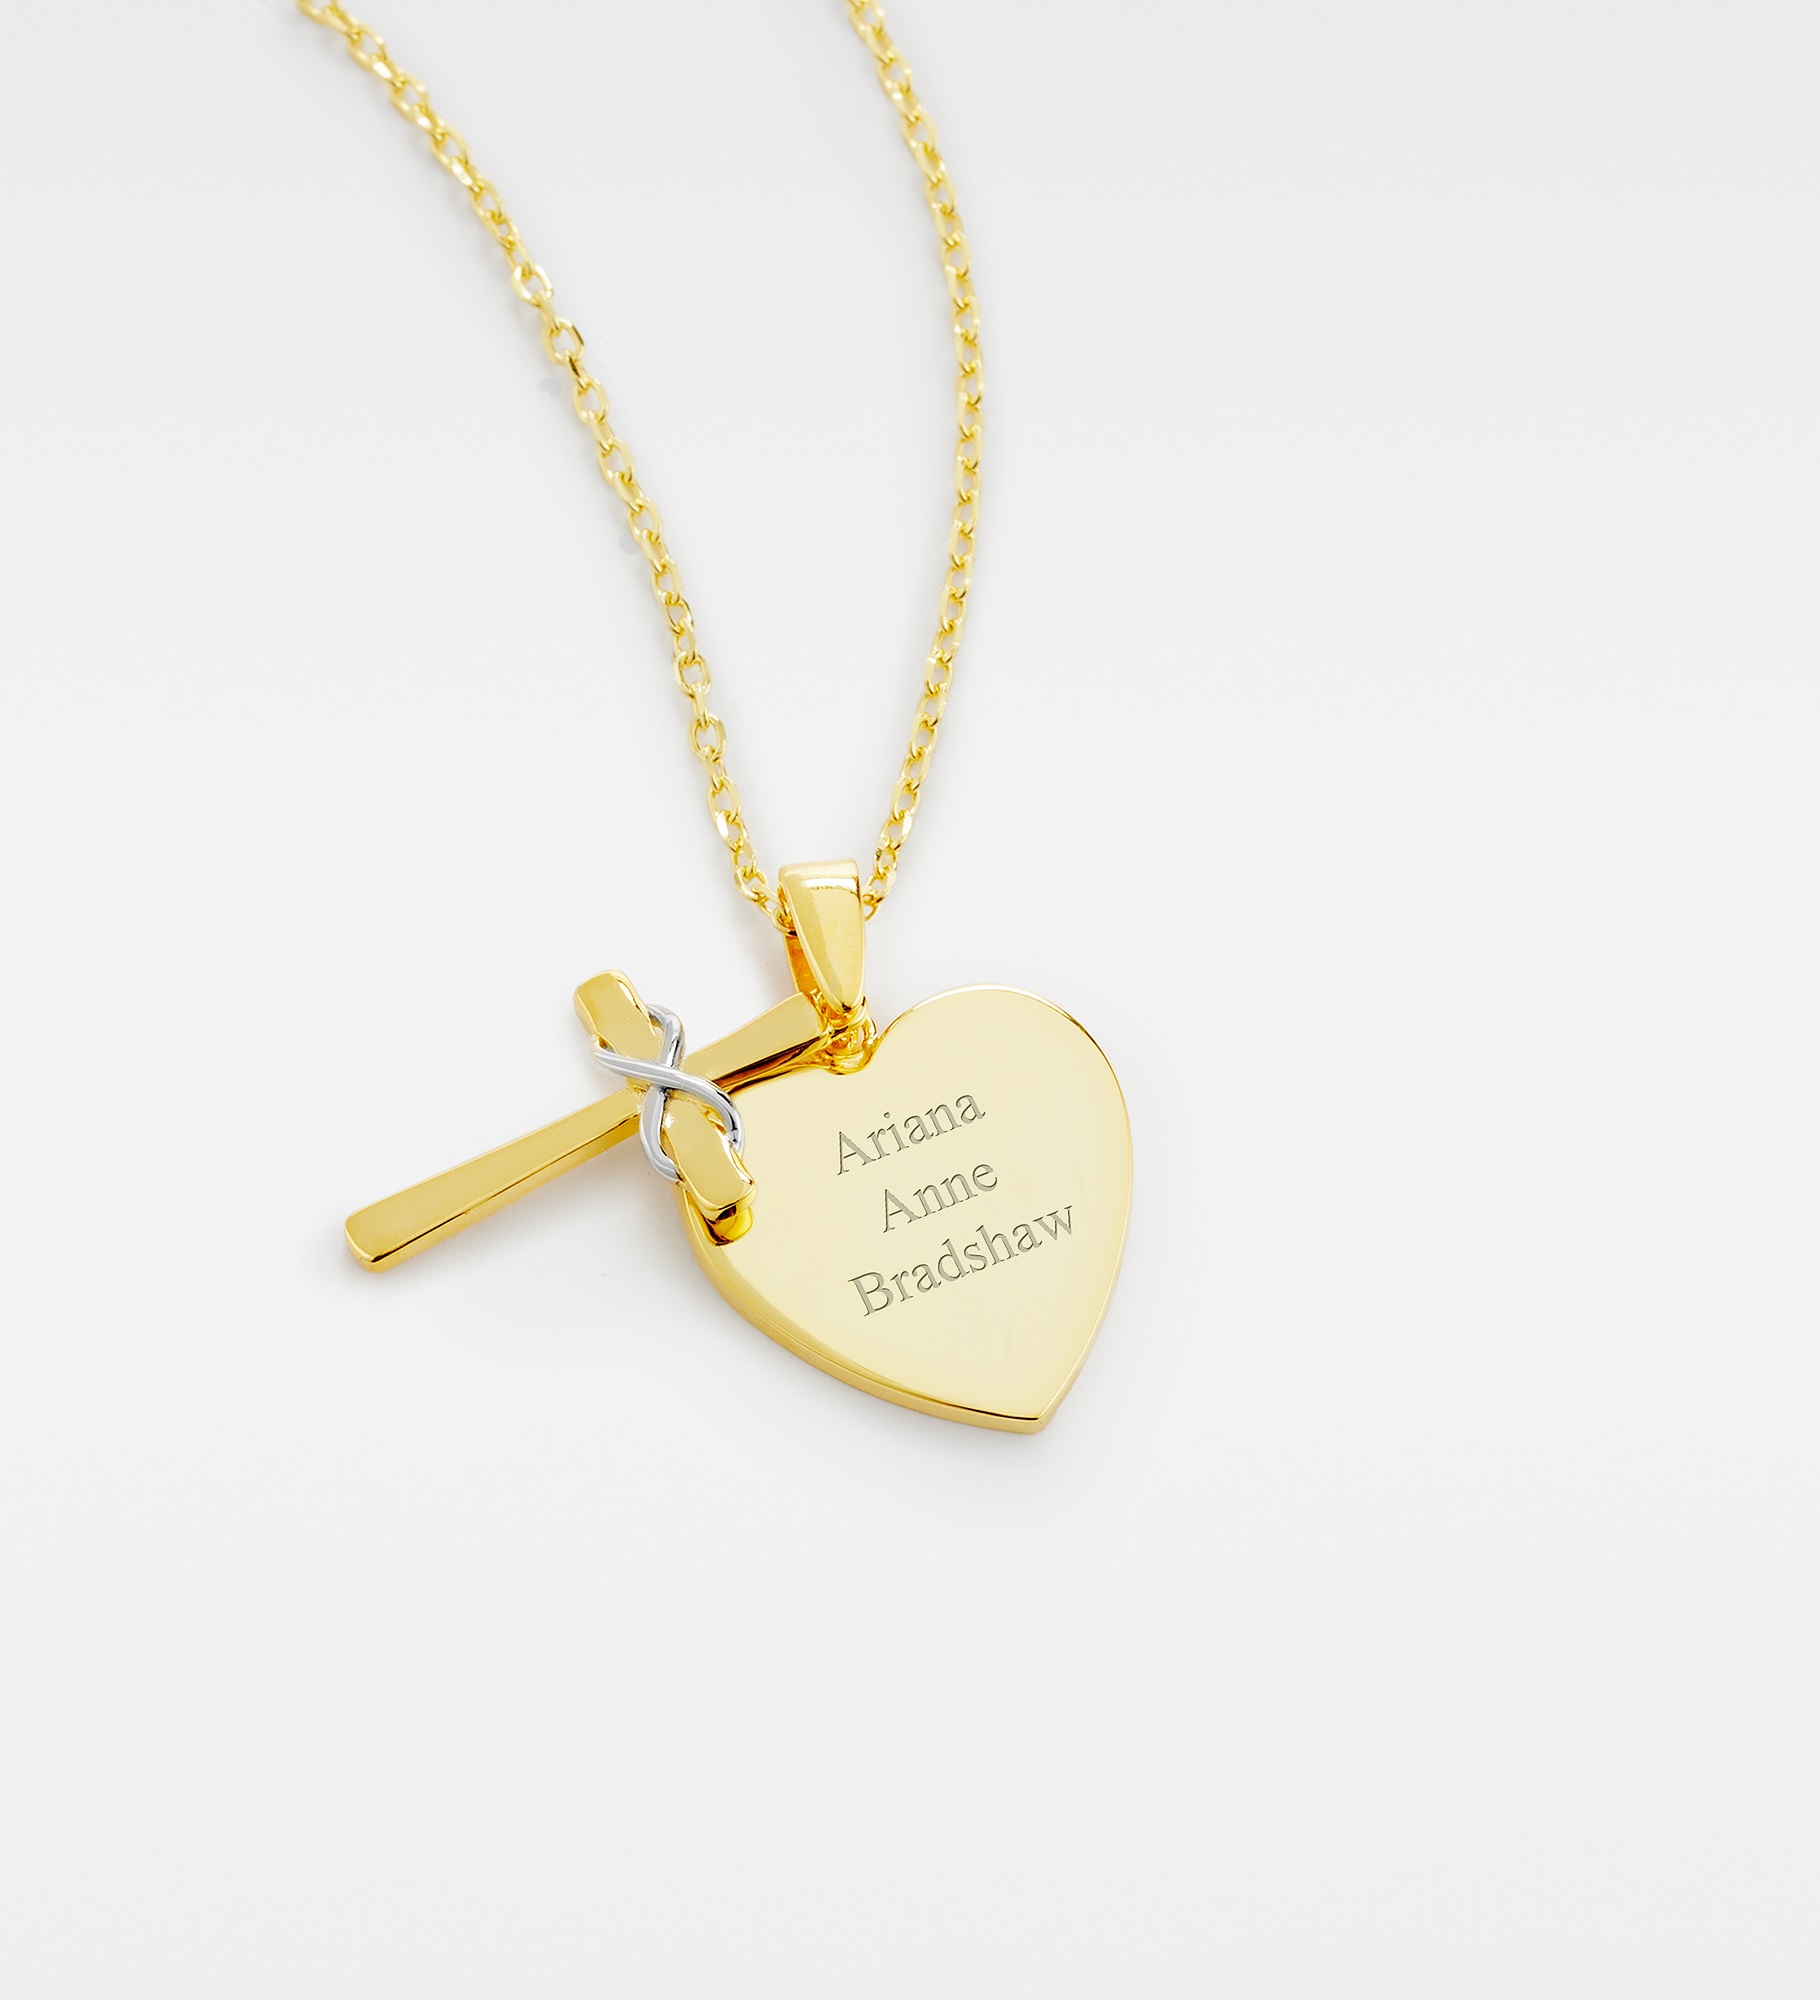 Engraved Gold Over Sterling Silver Cross and Heart Necklace